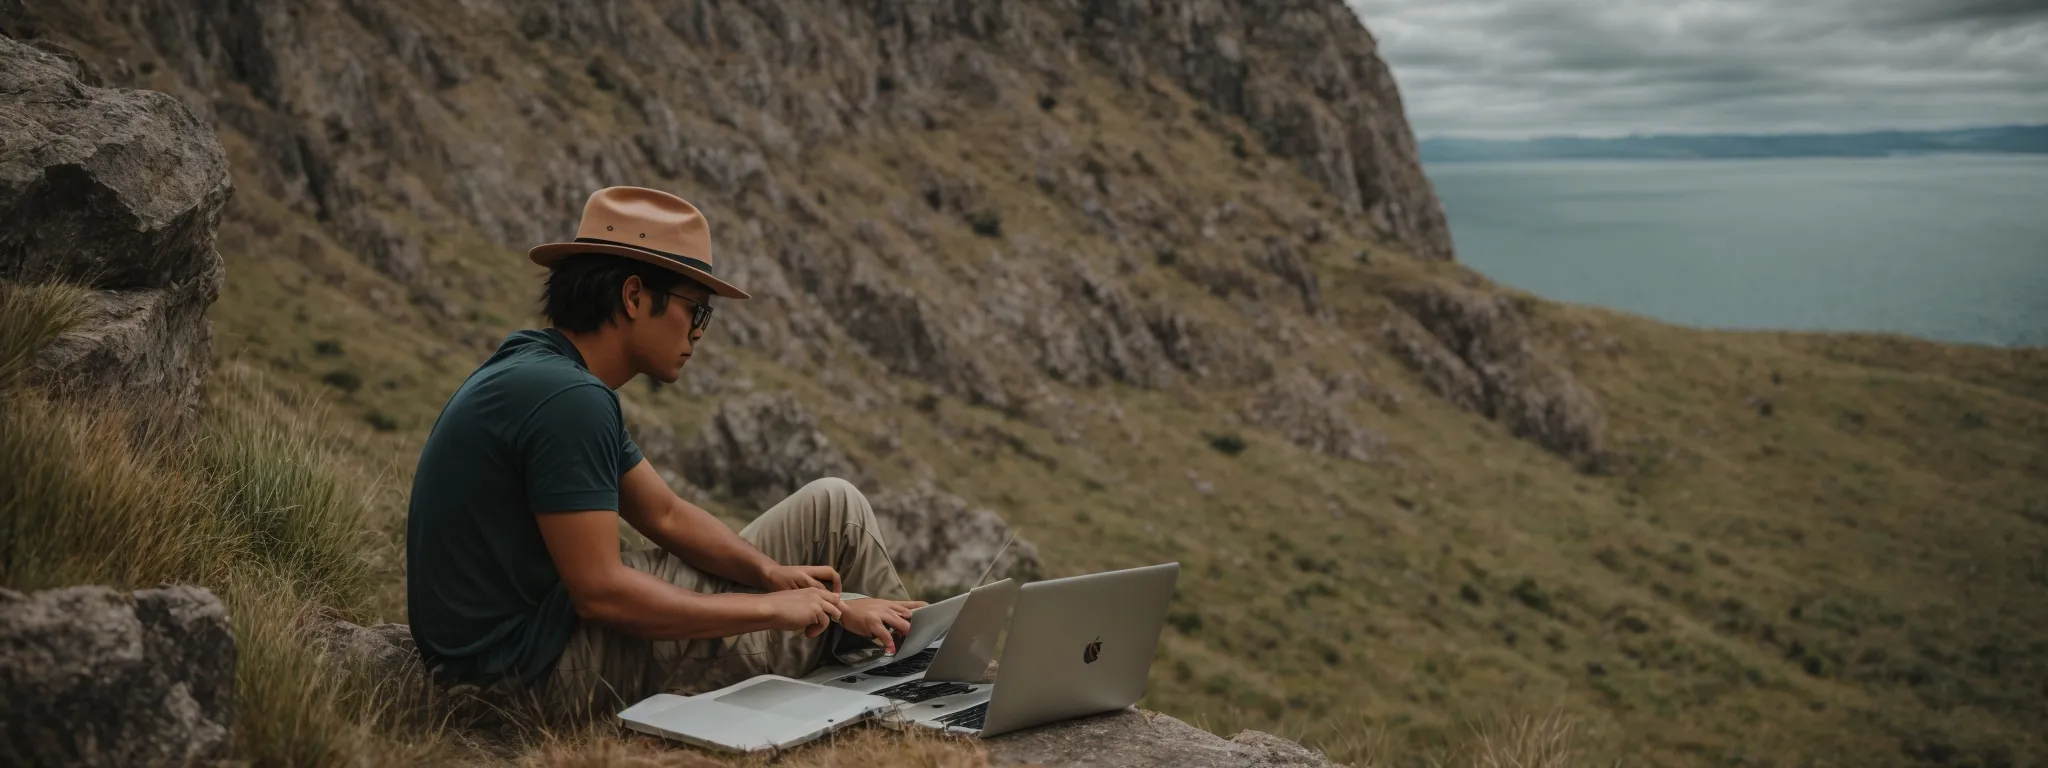 a travel blogger optimizing their destination website on a laptop amidst picturesque scenery.